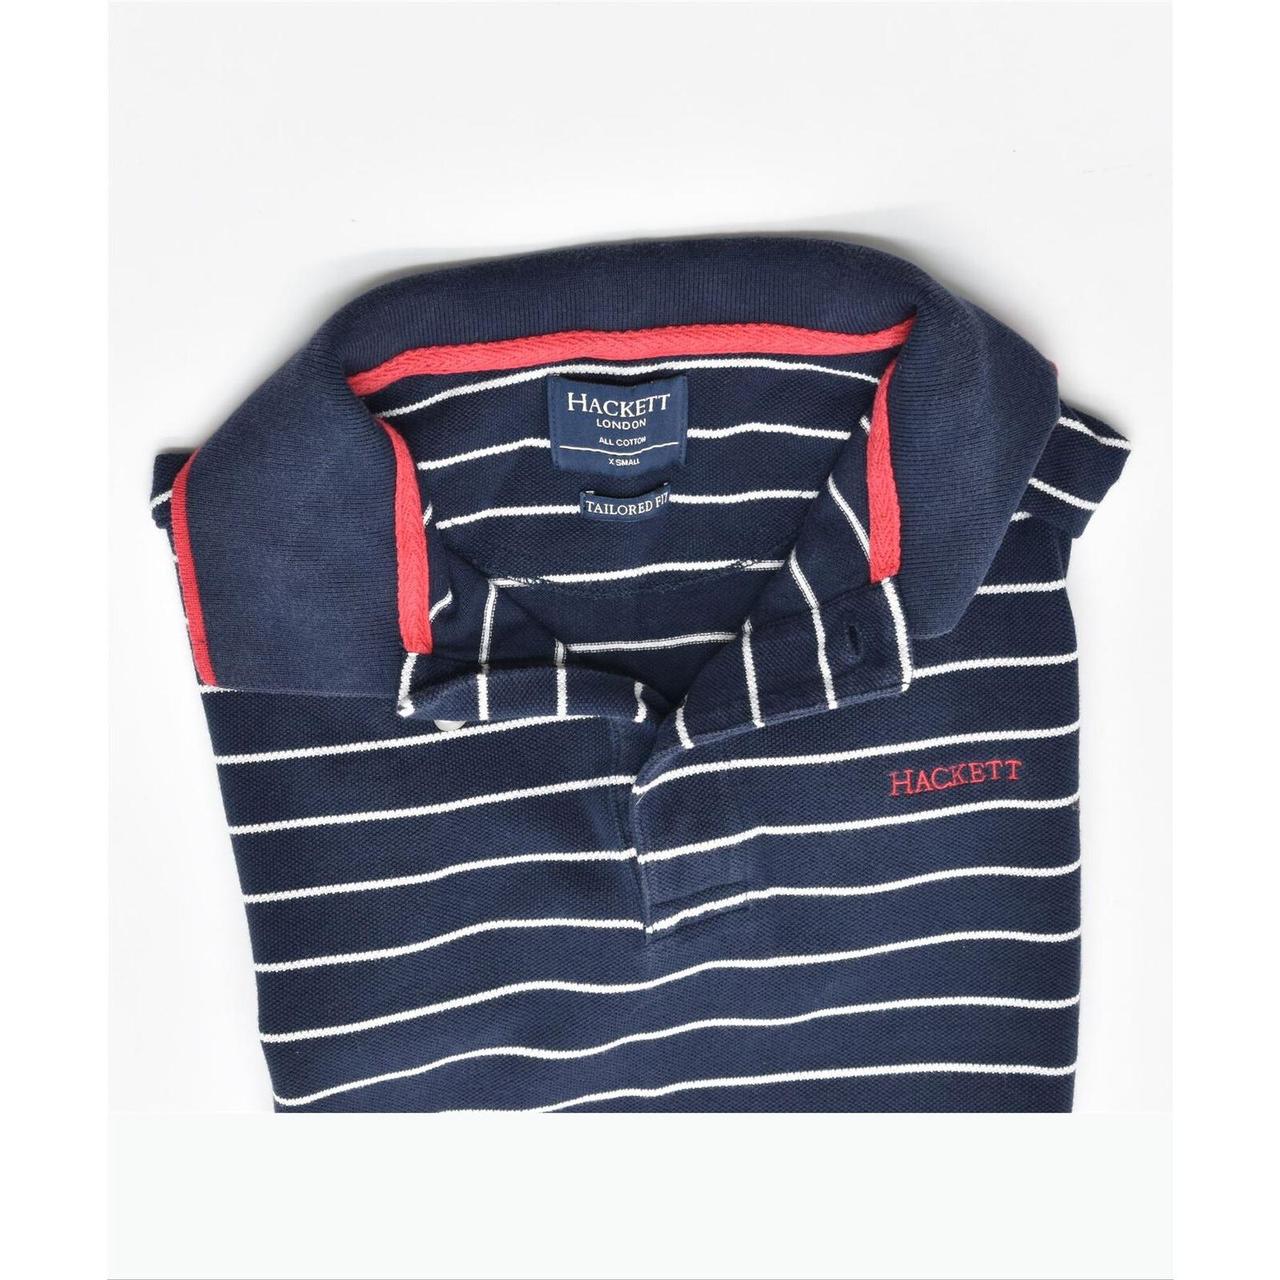 Product Image 3 - HACKETT MENS TAILORED FIT POLO